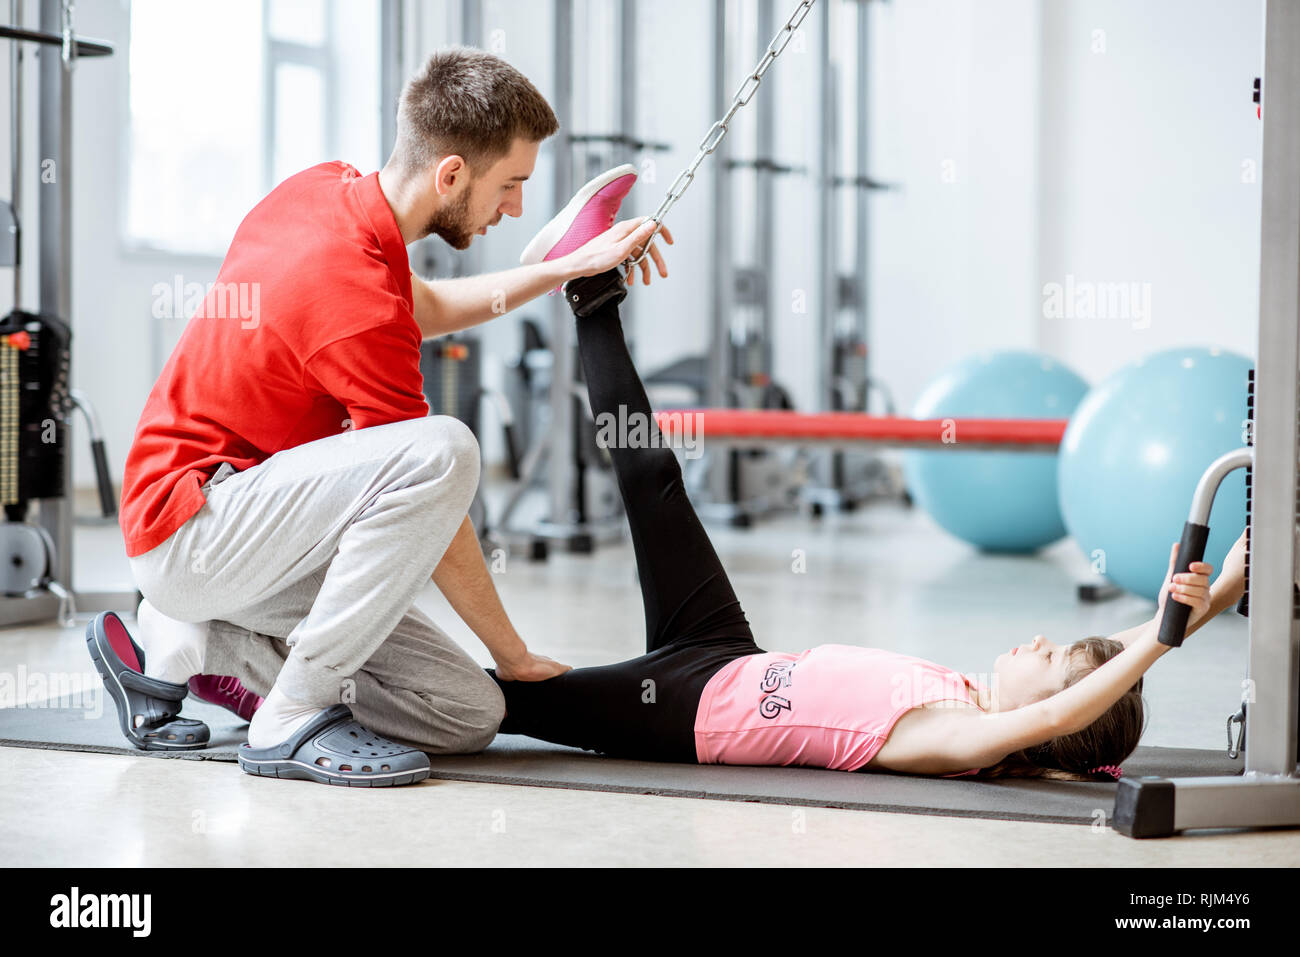 Young girl exercising on the decompression simulators with trainer during the spine treatment at the rehabilitation gym Stock Photo